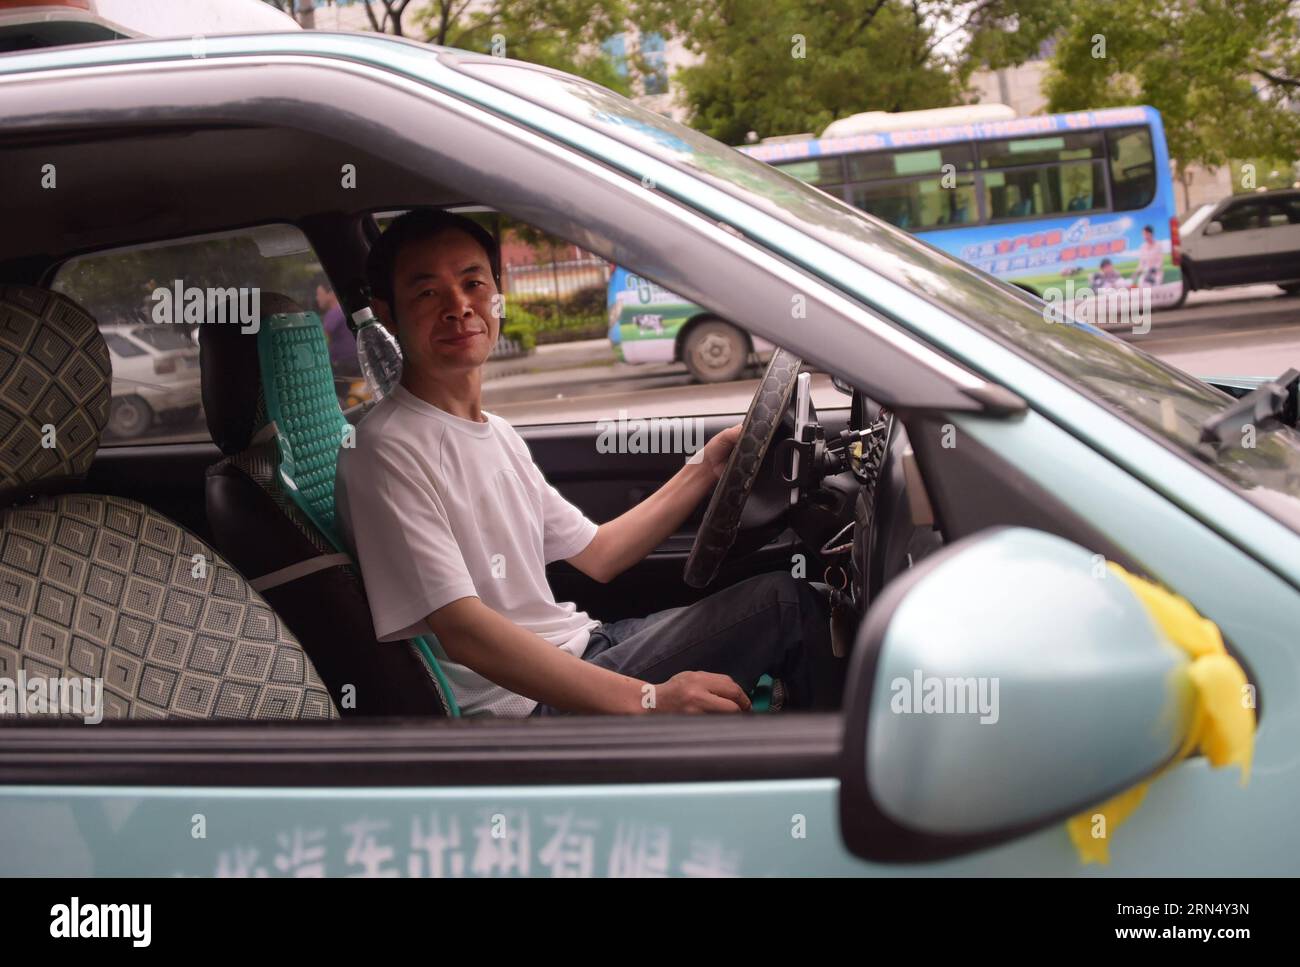 (150604) -- WUHAN, June 4, 2015 -- A taxi drives on a street with yellow ribbons tied to the rearview mirrors in Jianli, central China s Hubei Province, June 4, 2015. A cruise ship carrying more than 450 people on Monday sank in the Jianli section of the Yangtze River. Many local drivers are joining the rescue effort by offering free rides for rescuers and relatives of victims with the sign of yellow ribbons. ) (wf) CHINA-HUBEI-SHIP SINKING-RESCUE (CN) ChengxMin PUBLICATIONxNOTxINxCHN   Wuhan June 4 2015 a Taxi Drives ON a Street With Yellow ribbons Tied to The rearview mirrors in Jianli Centr Stock Photo